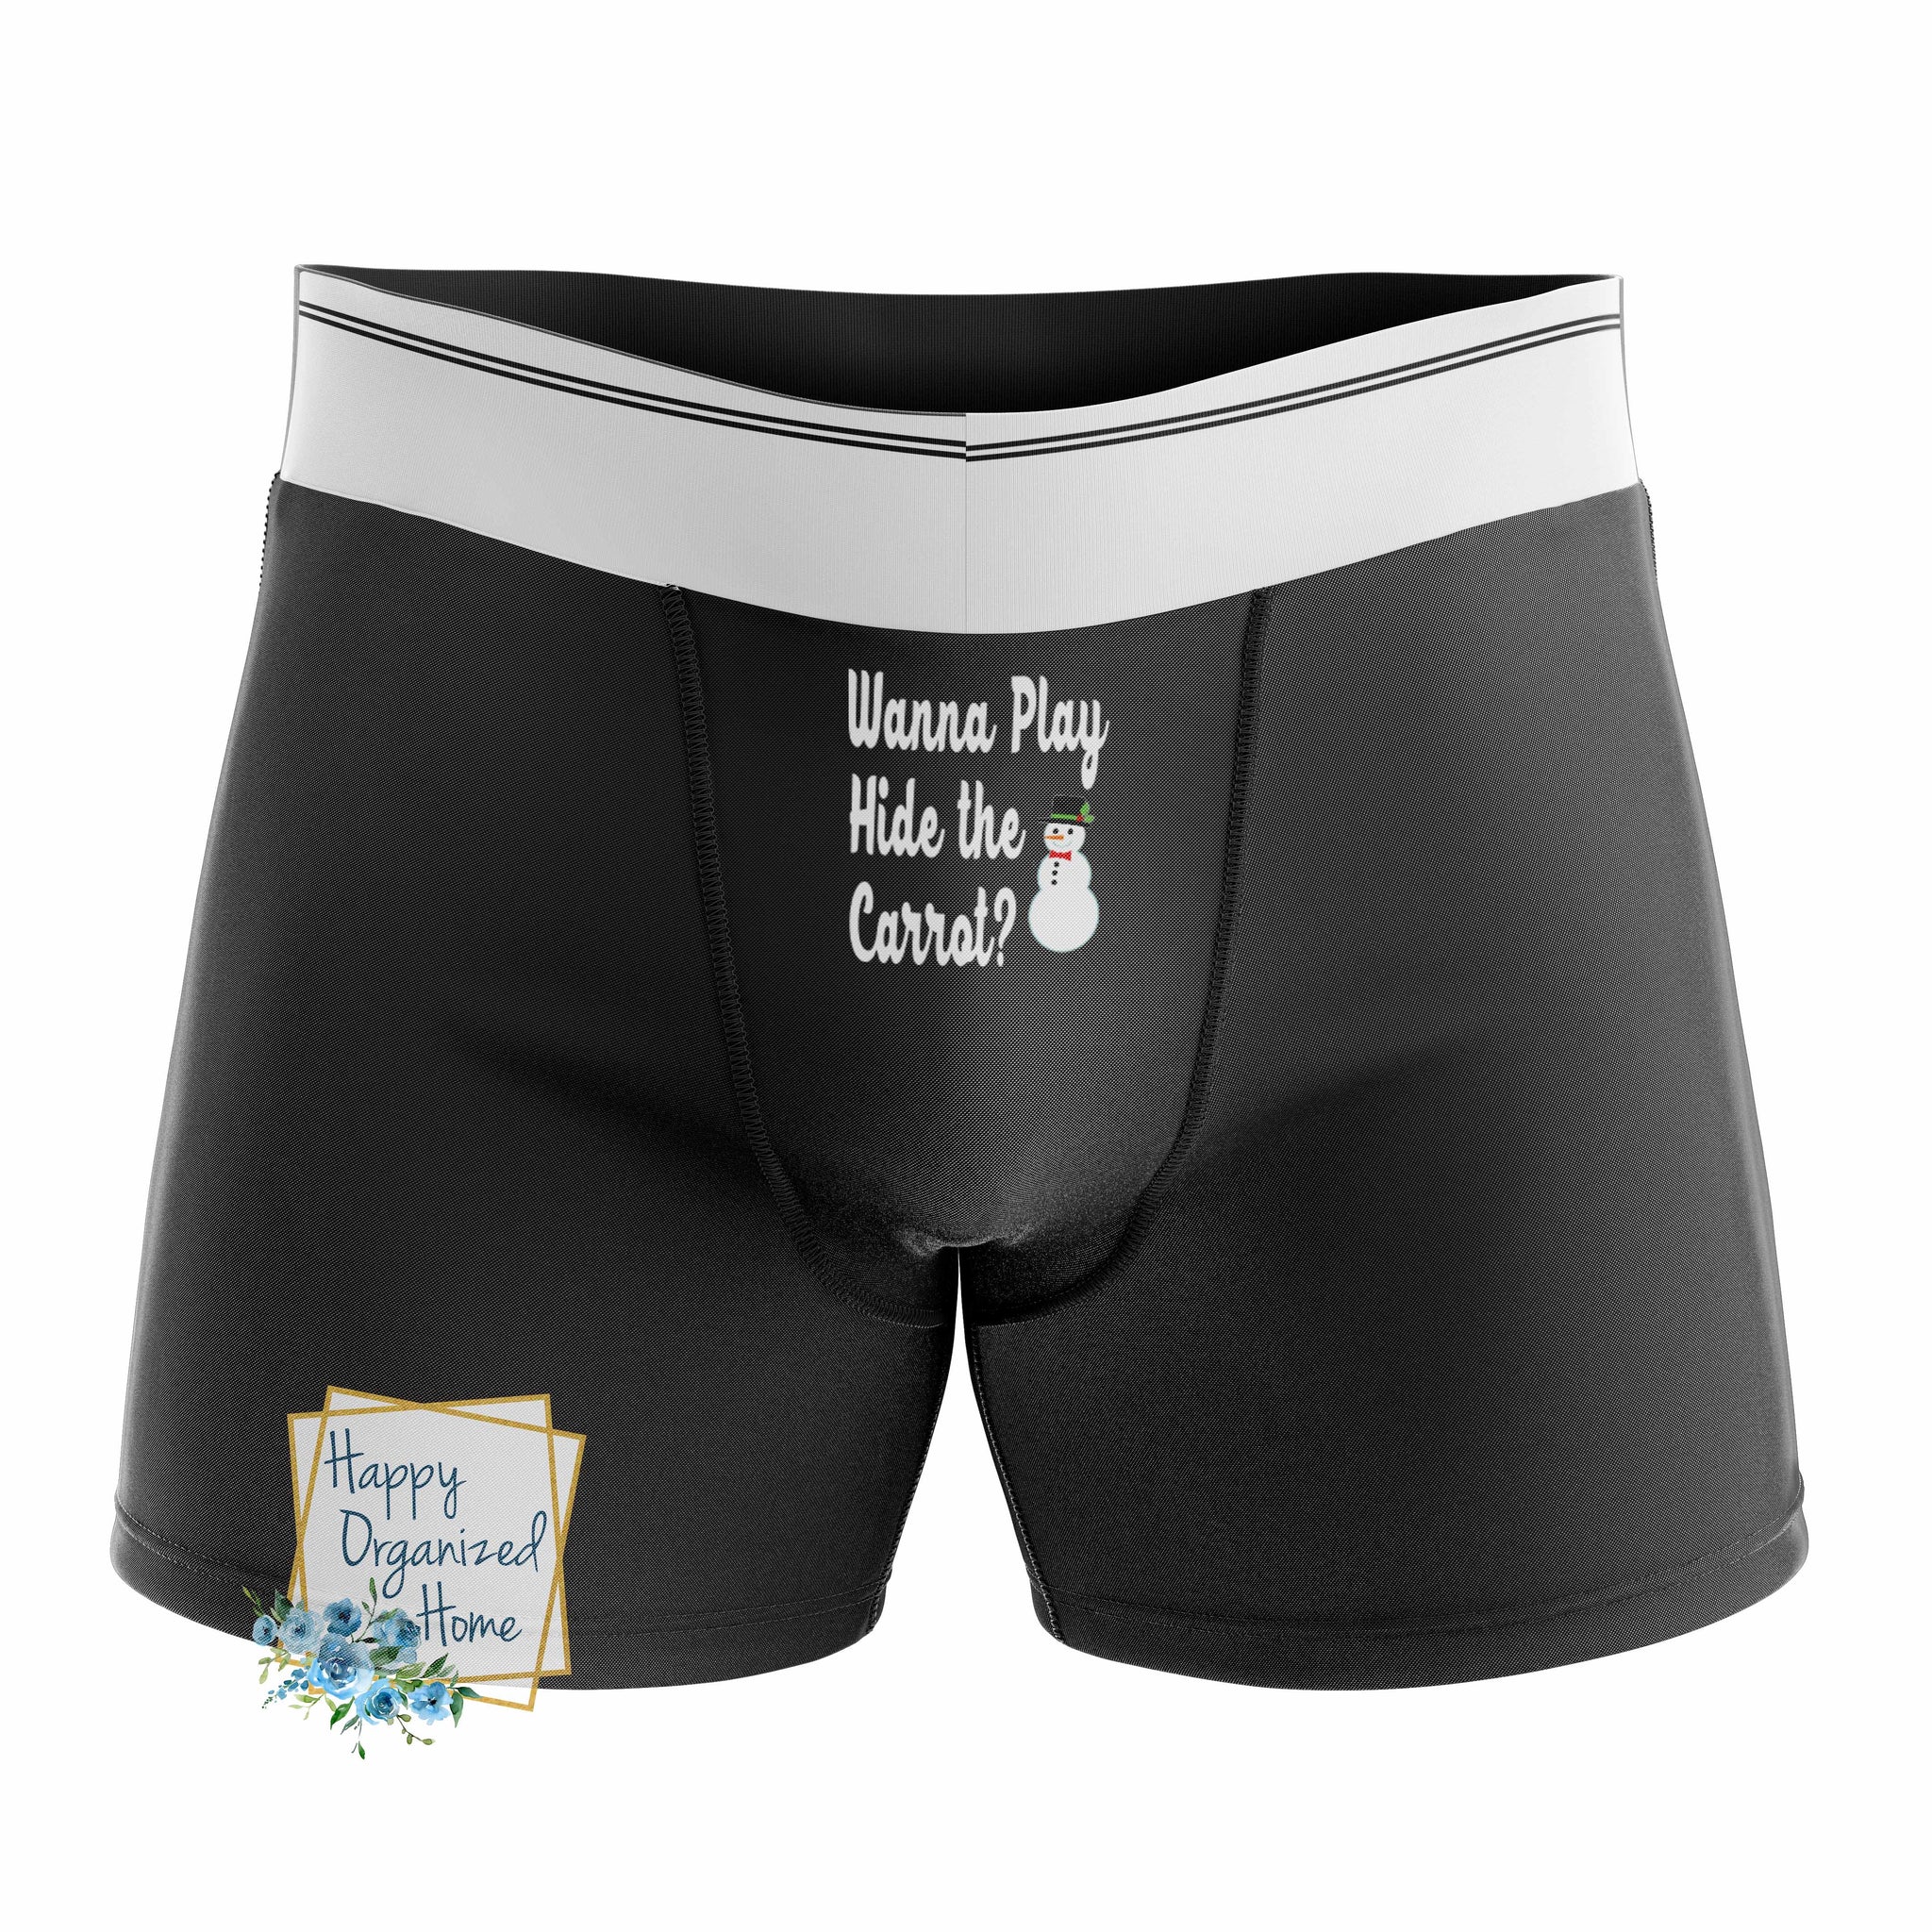 Wanna Play Hide the Carrot? - Men's Naughty Boxer Briefs – Happy